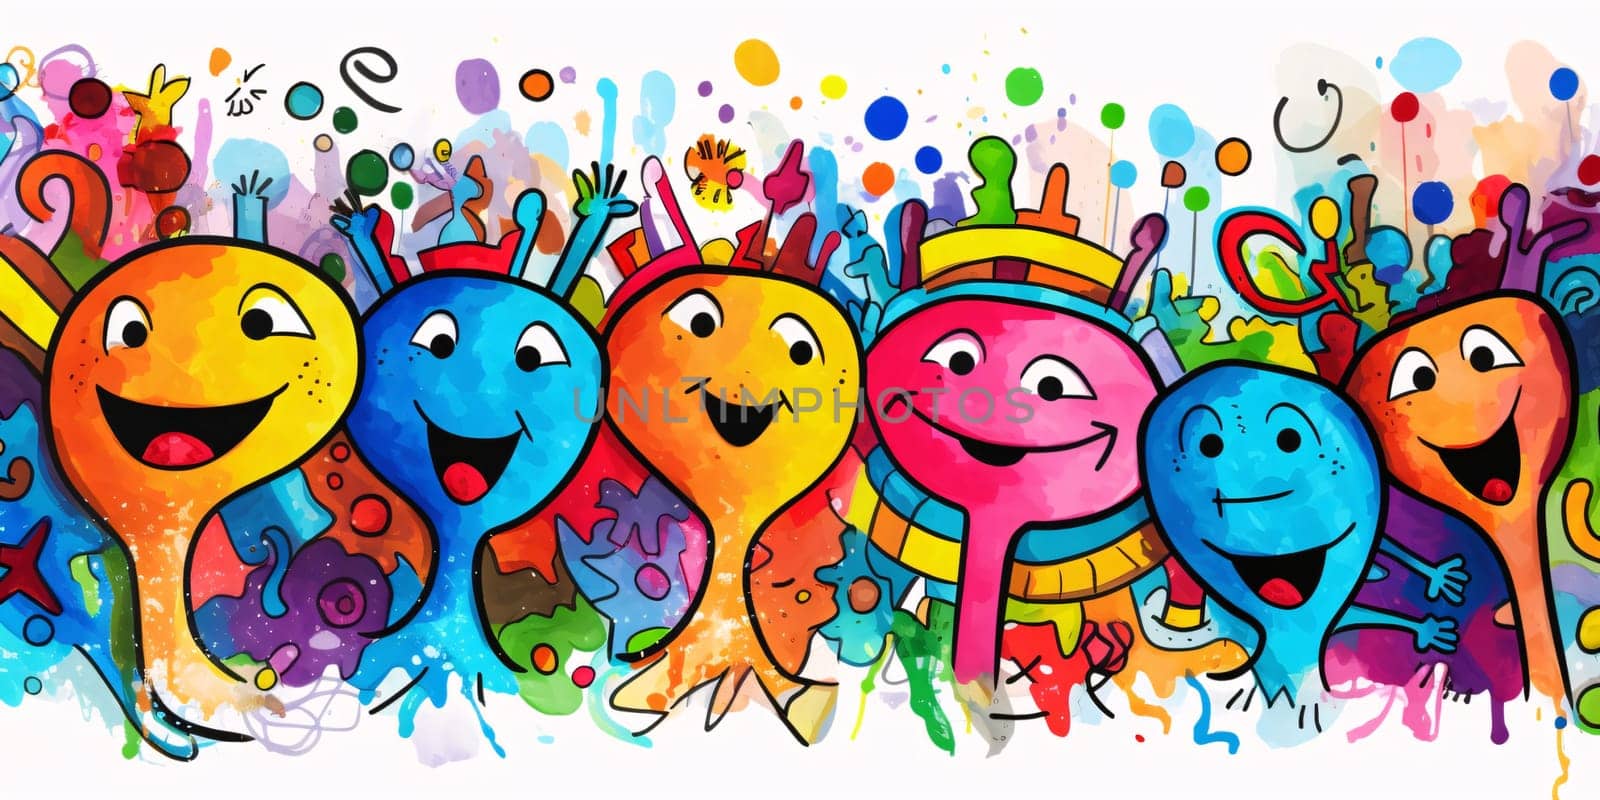 Banner: Cute colorful hand drawn doodle cartoon characters, vector illustration